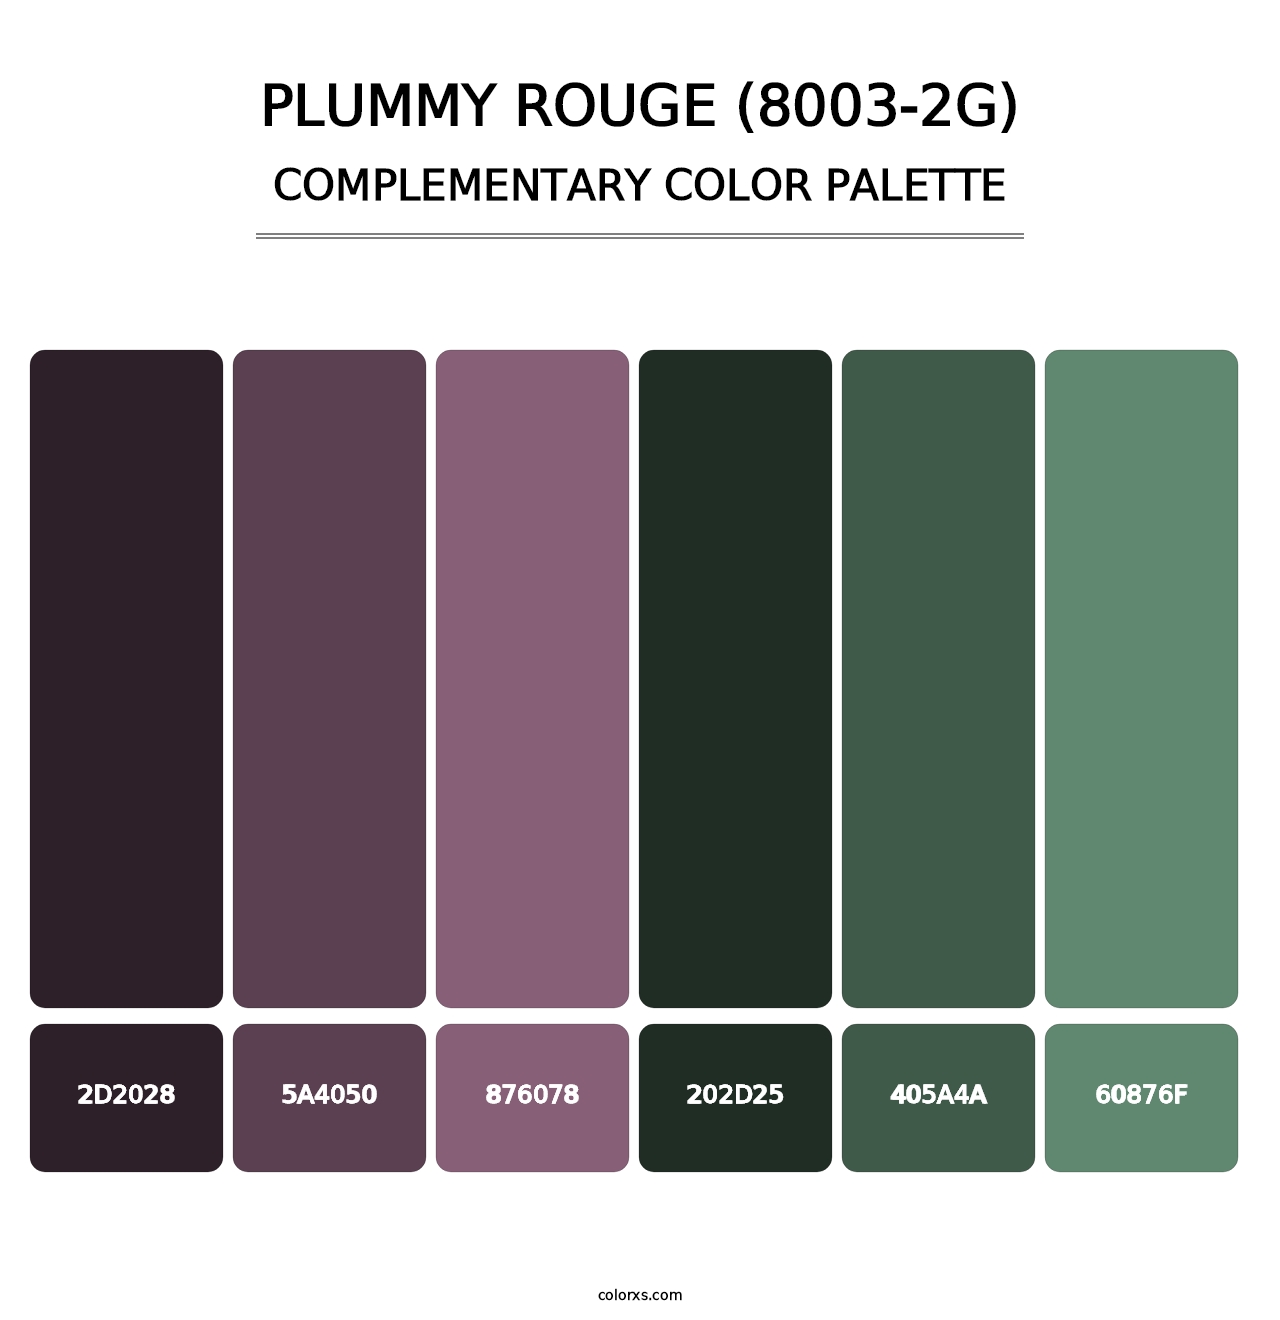 Plummy Rouge (8003-2G) - Complementary Color Palette